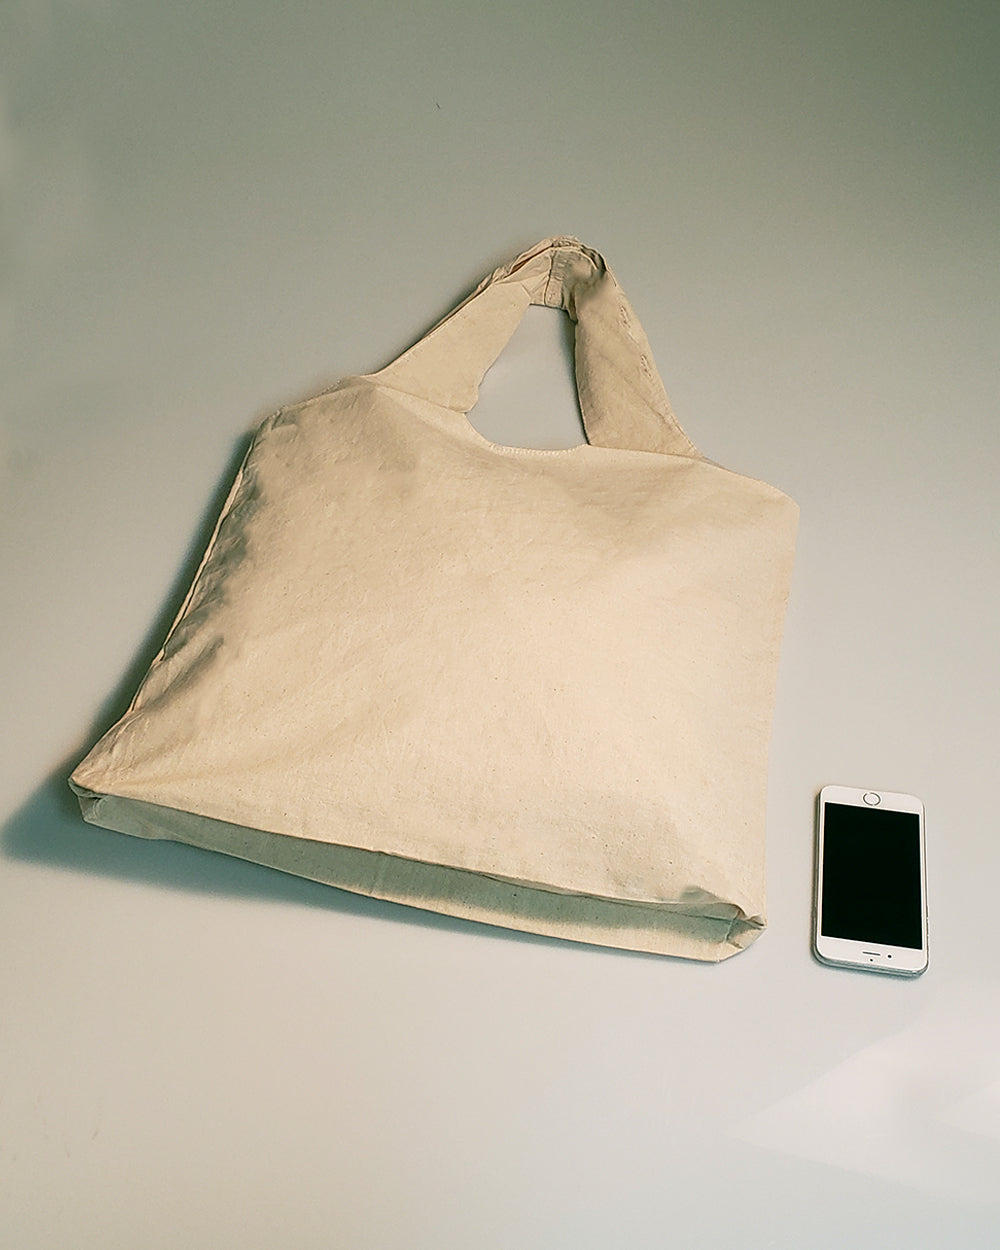 Large 100% Cotton Organic Stow-N-Go Tote Bag - OR130